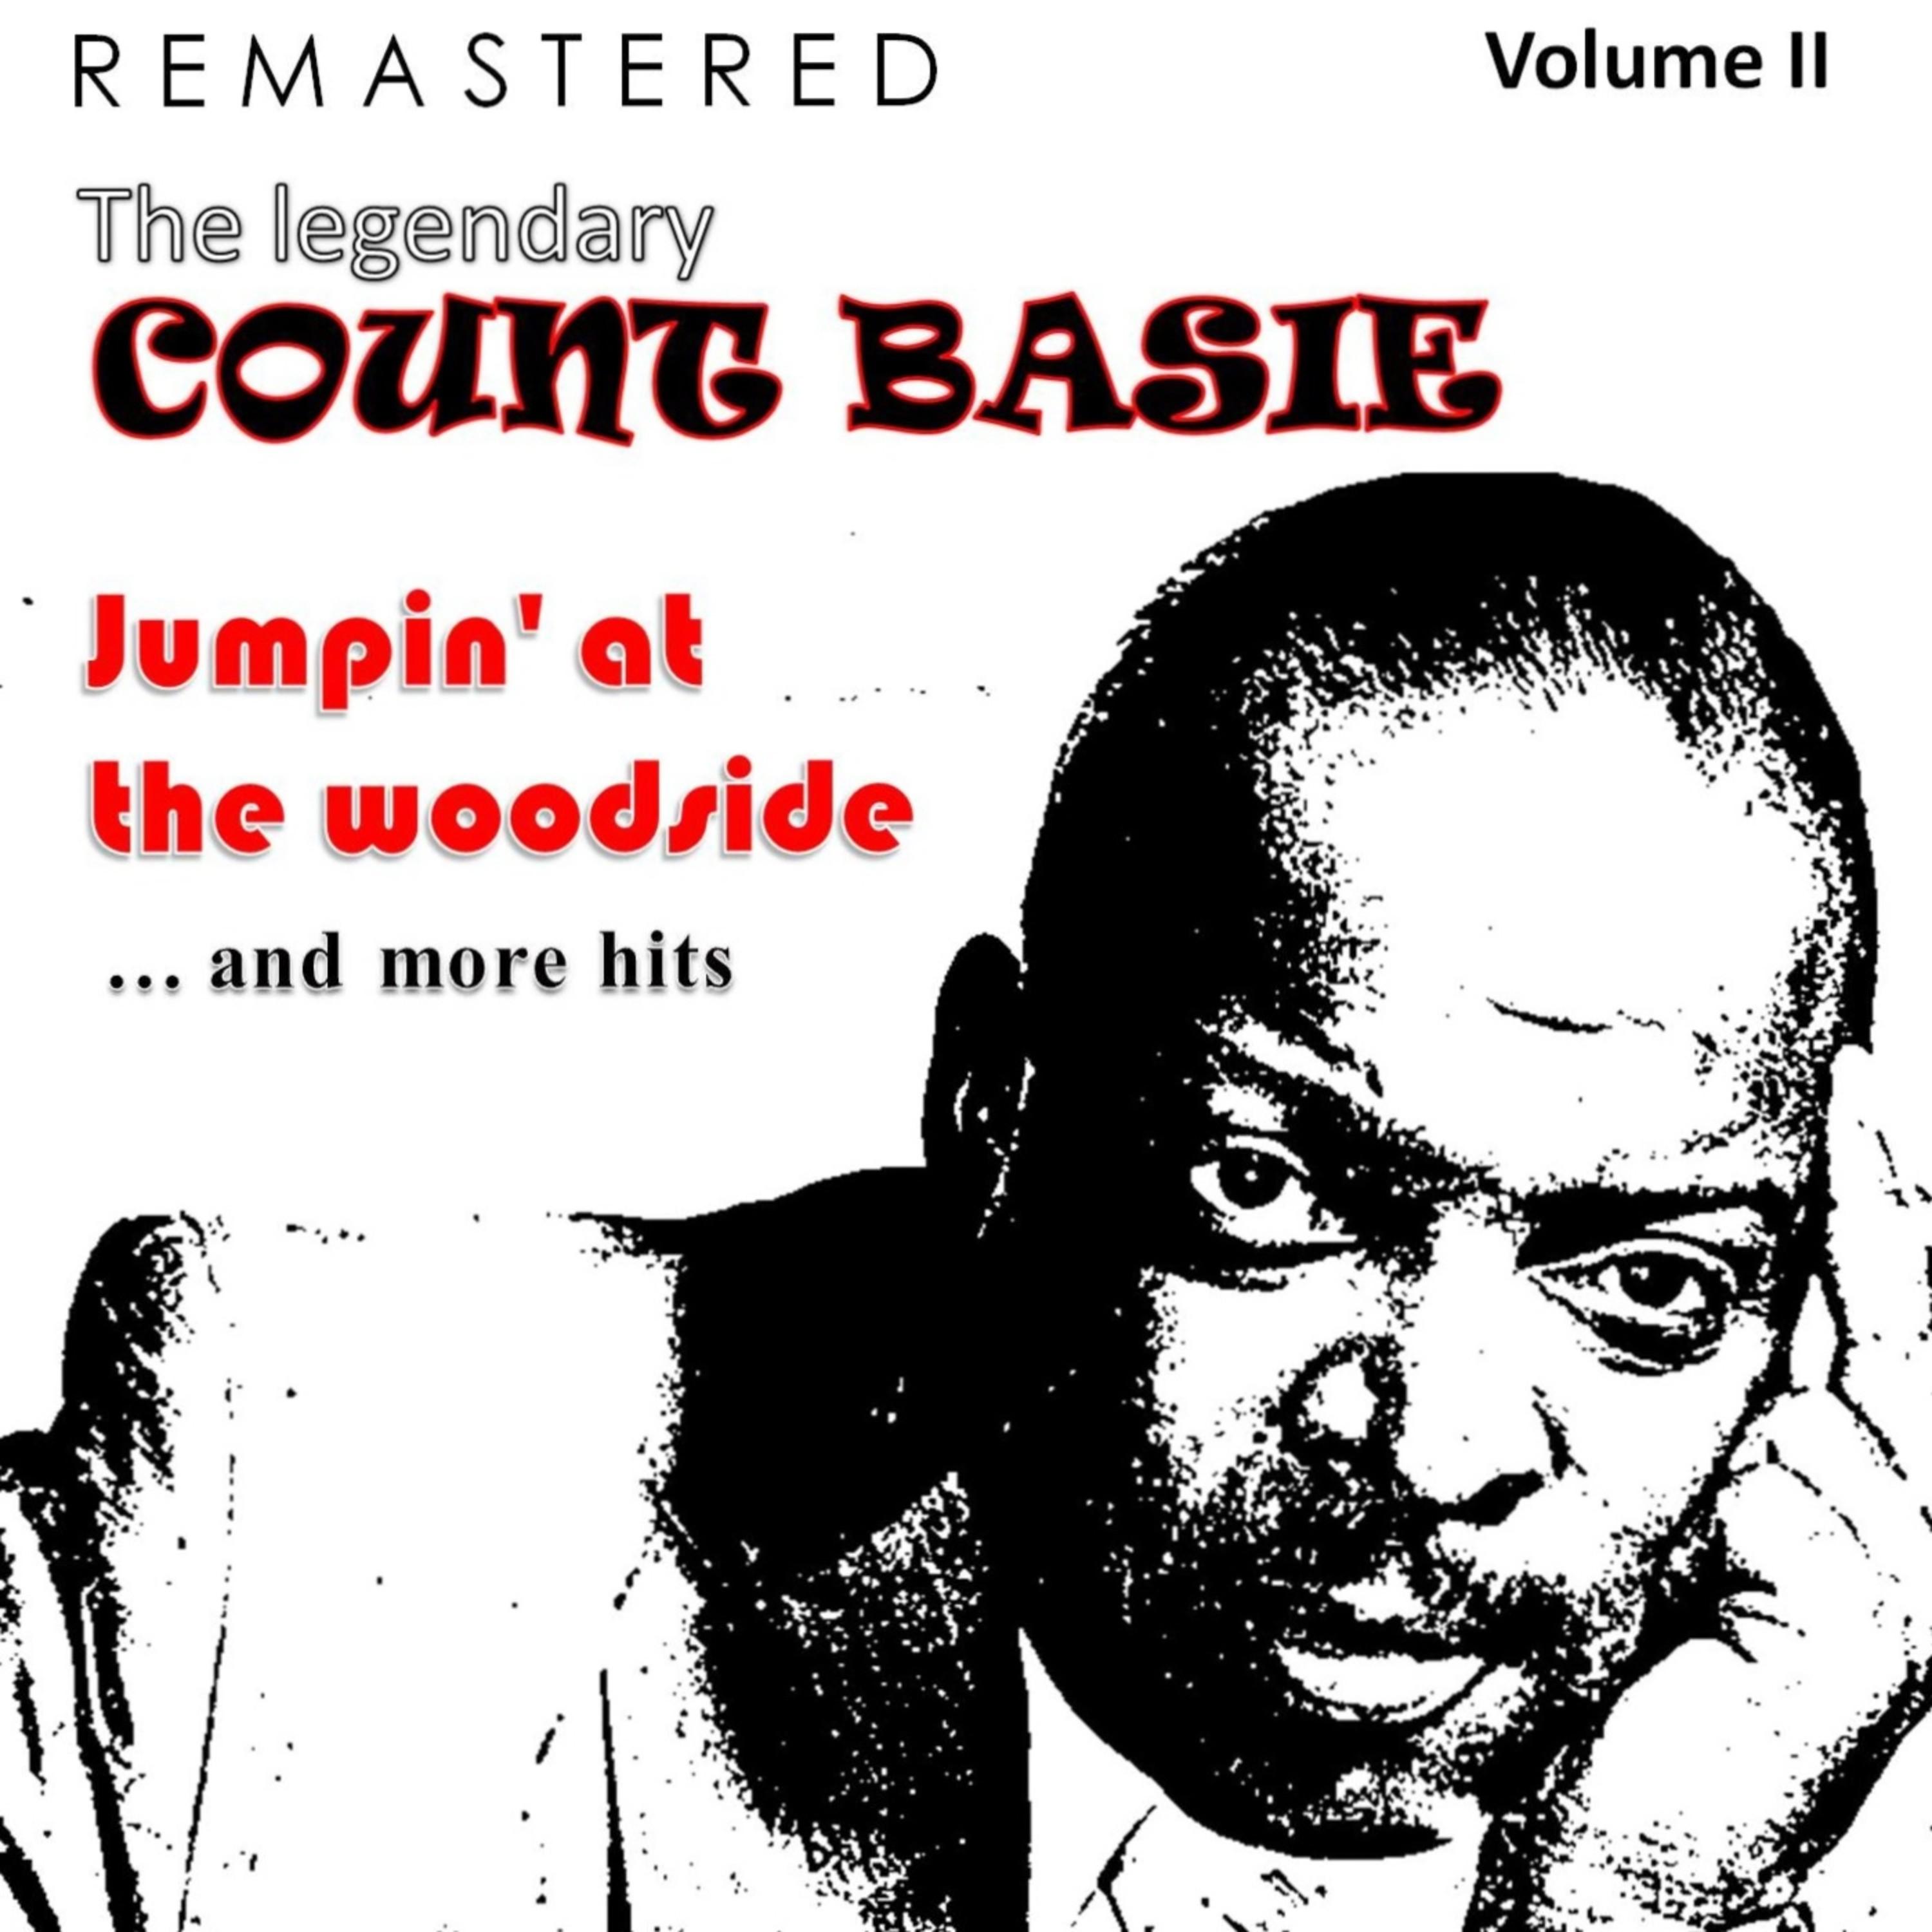 The Legendary Count Basie, Volume II: Jumpin'at the Woodside... and More Hits (Remastered)